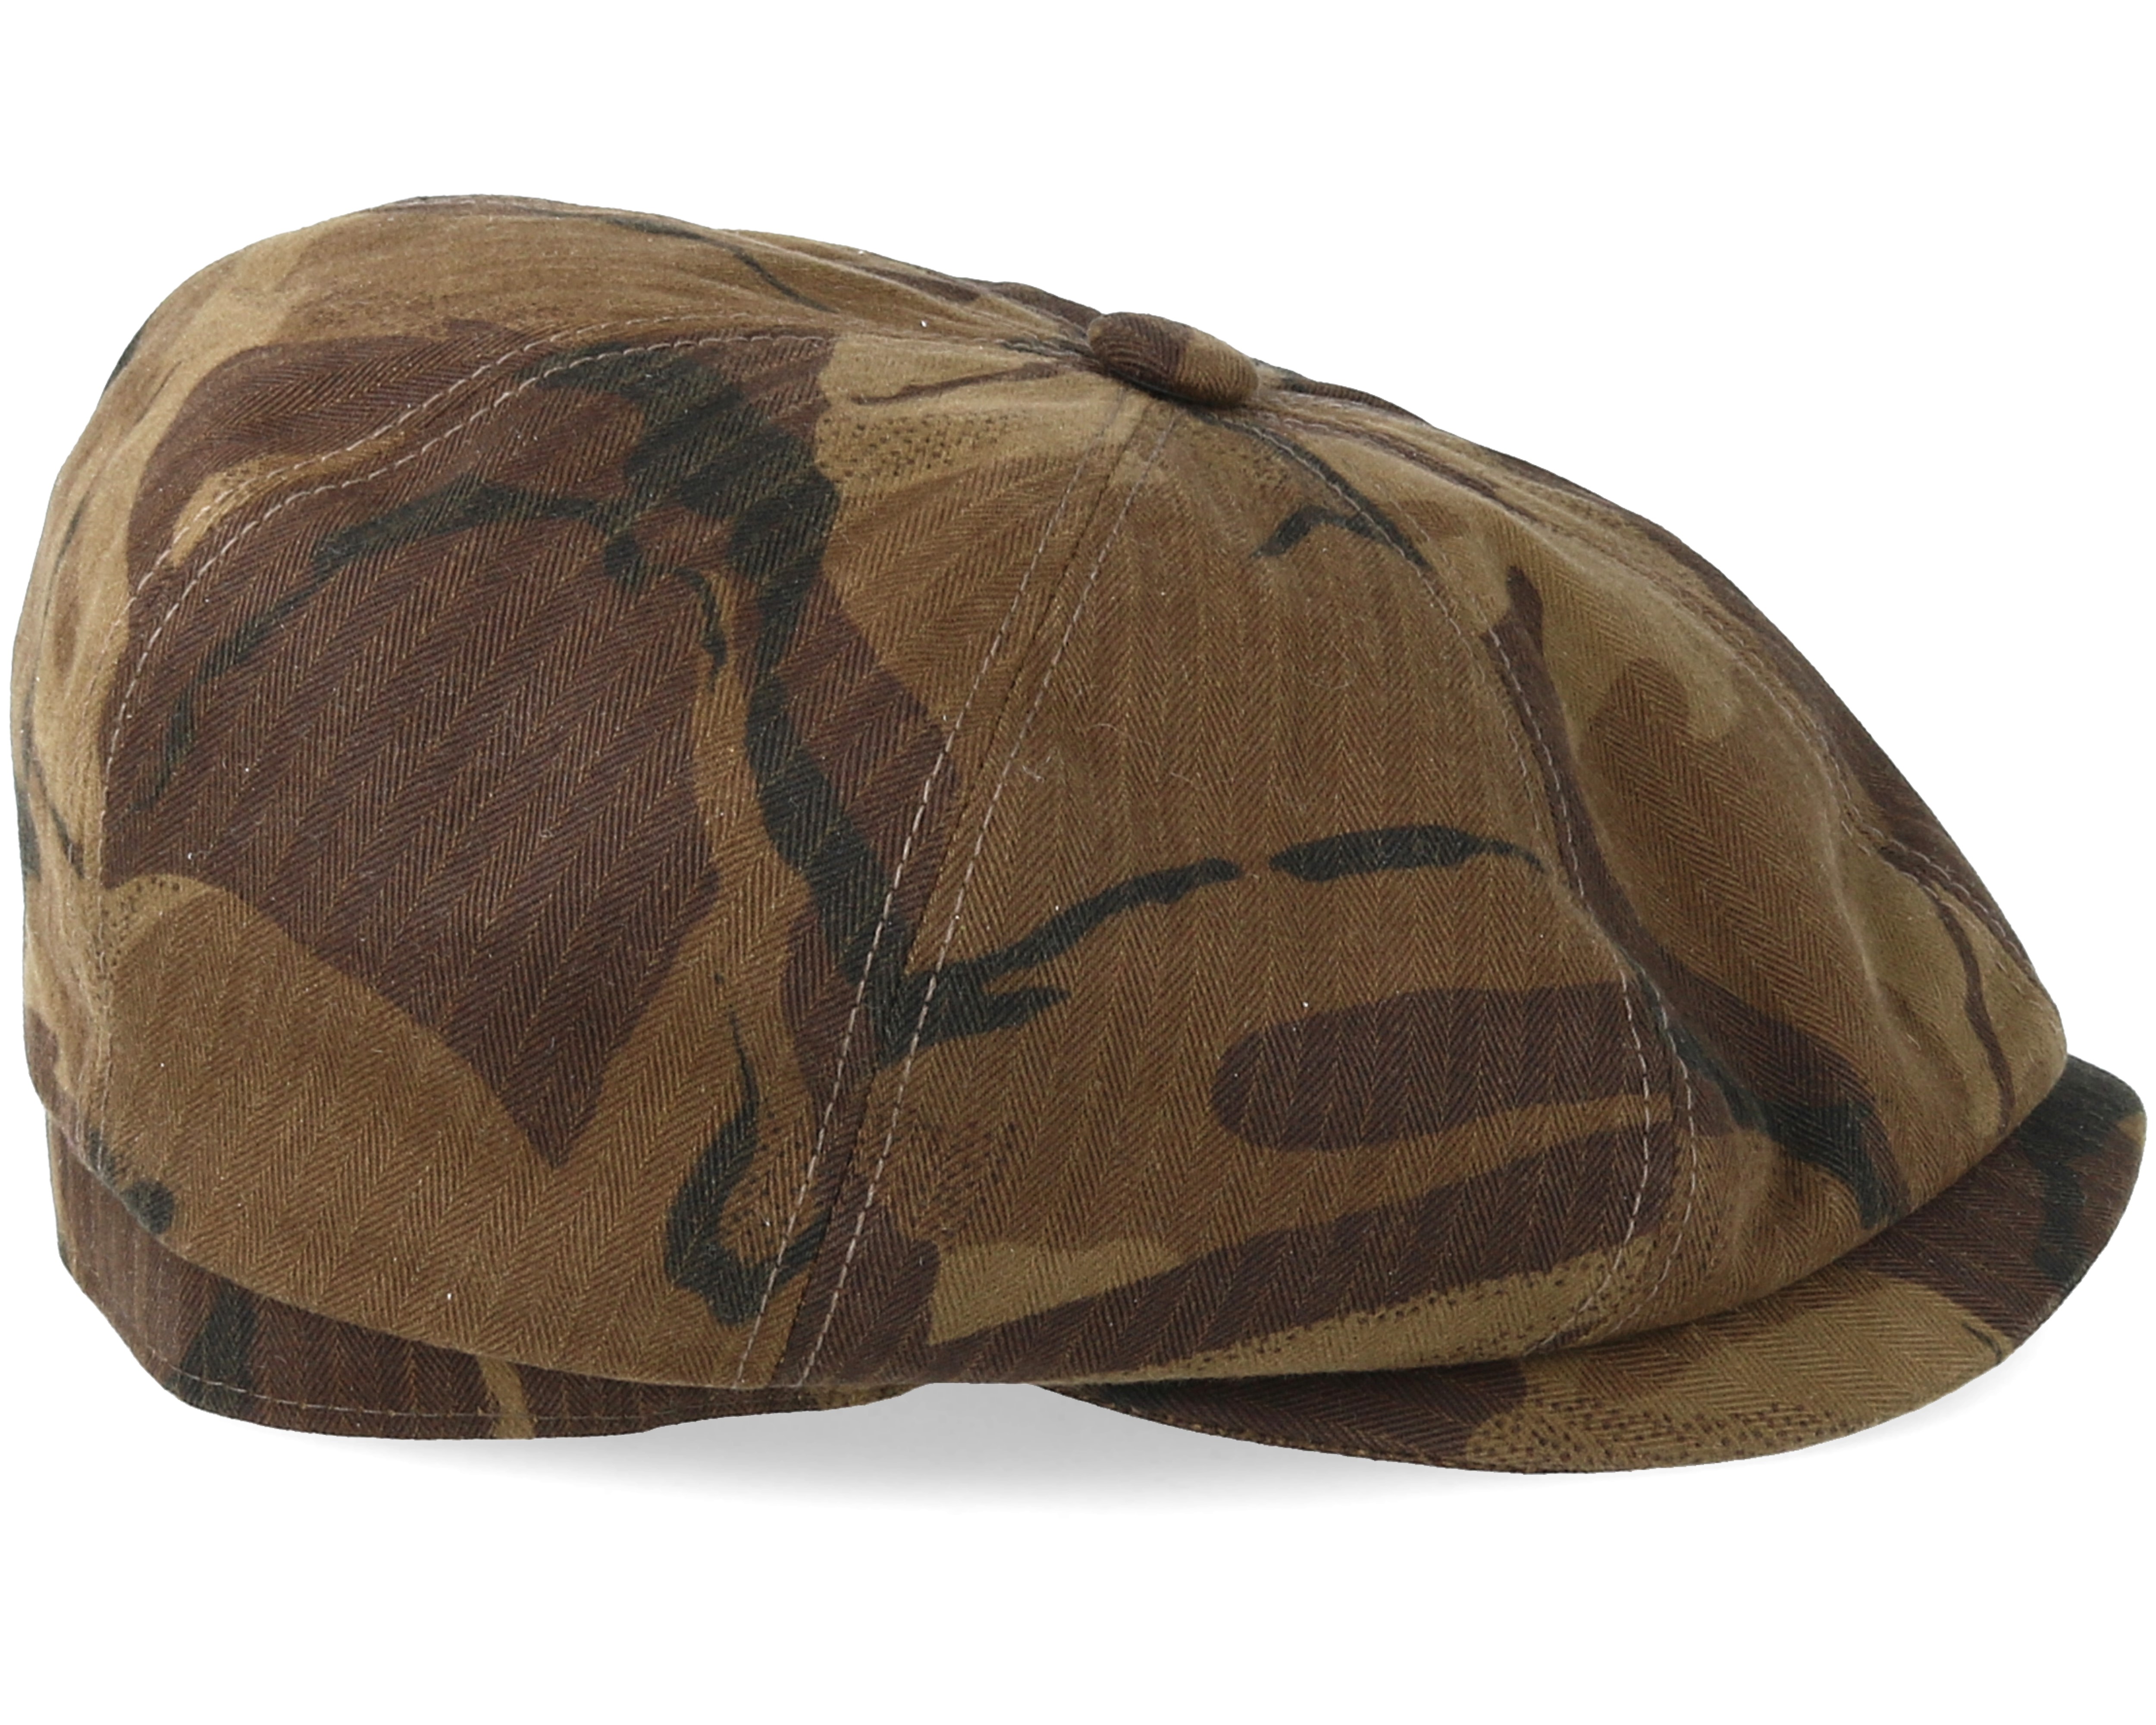 Hatteras Waxed Cotton Camouflage Flat Cap - Stetson caps